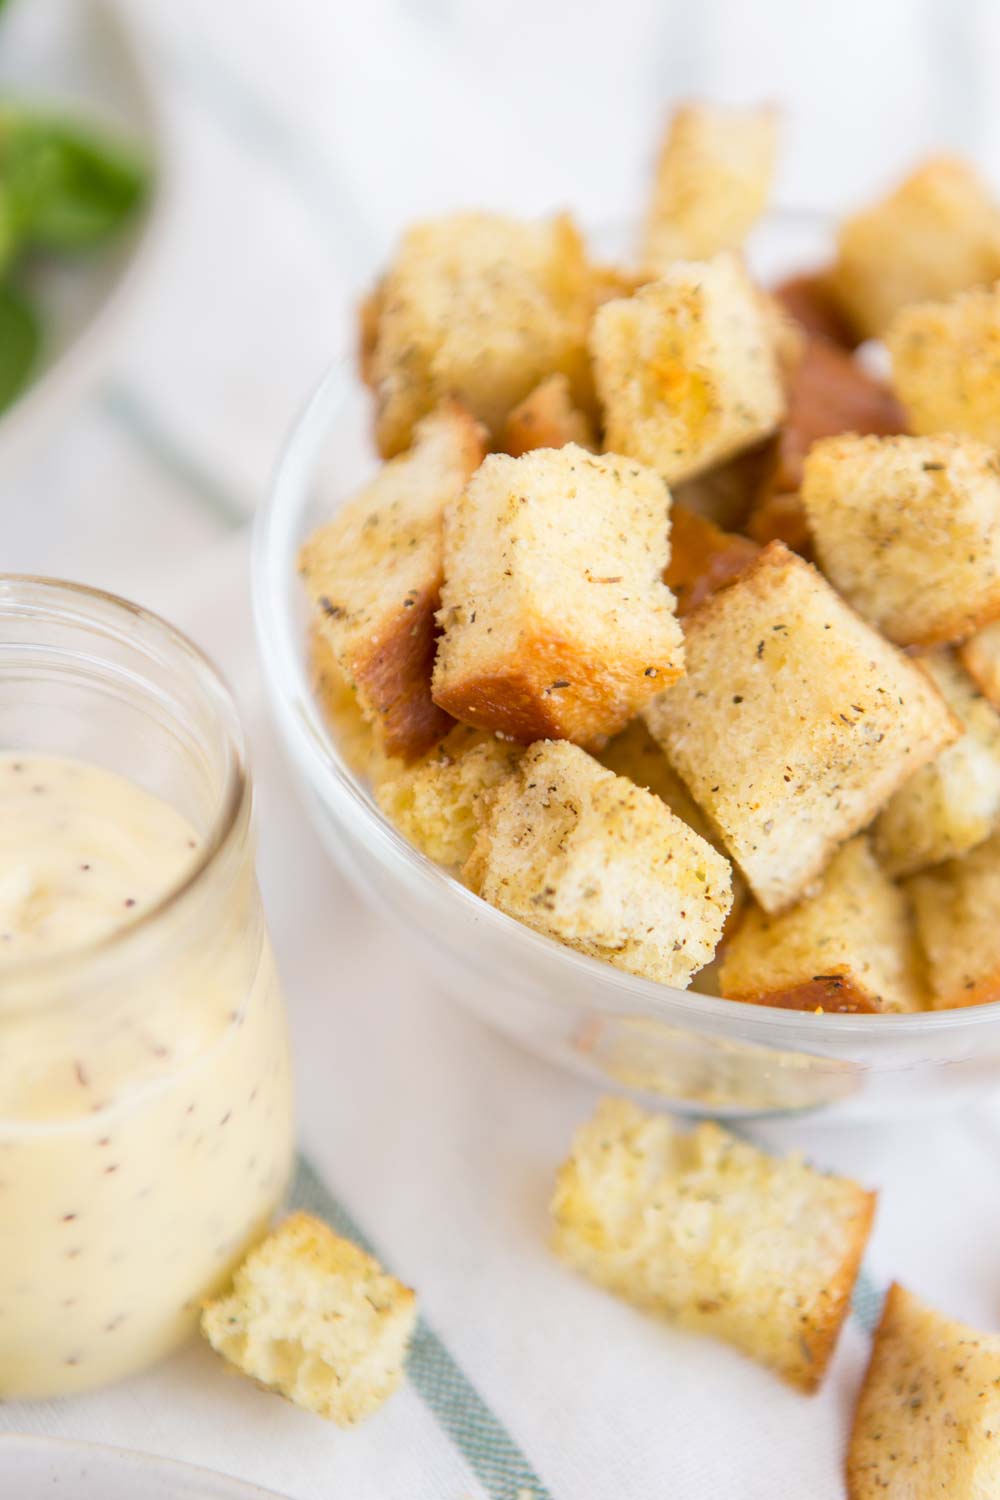 Everything that you need to know about homemade croutons!